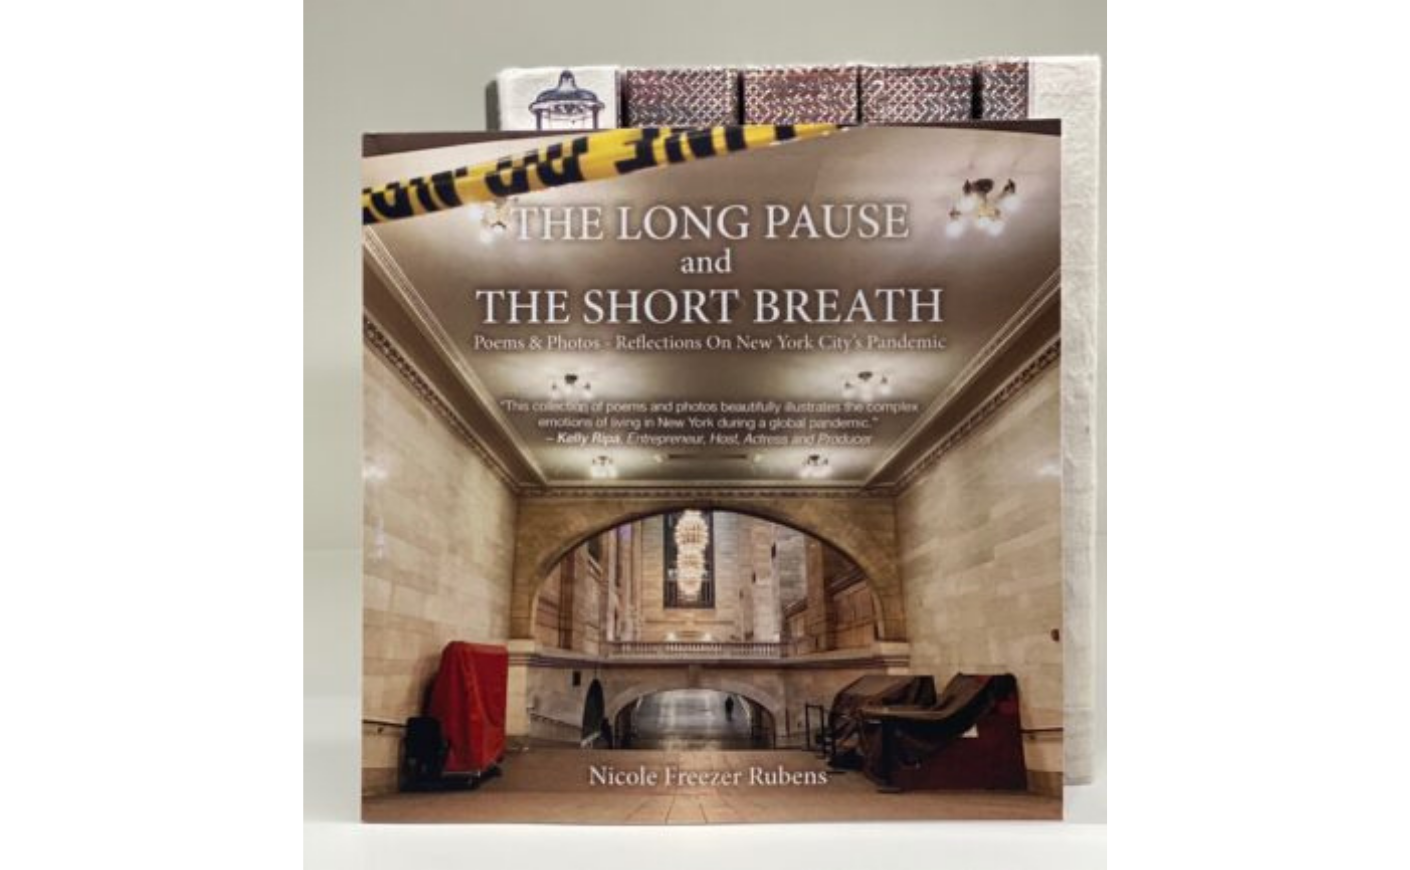 The Long Pause and The Short Breath